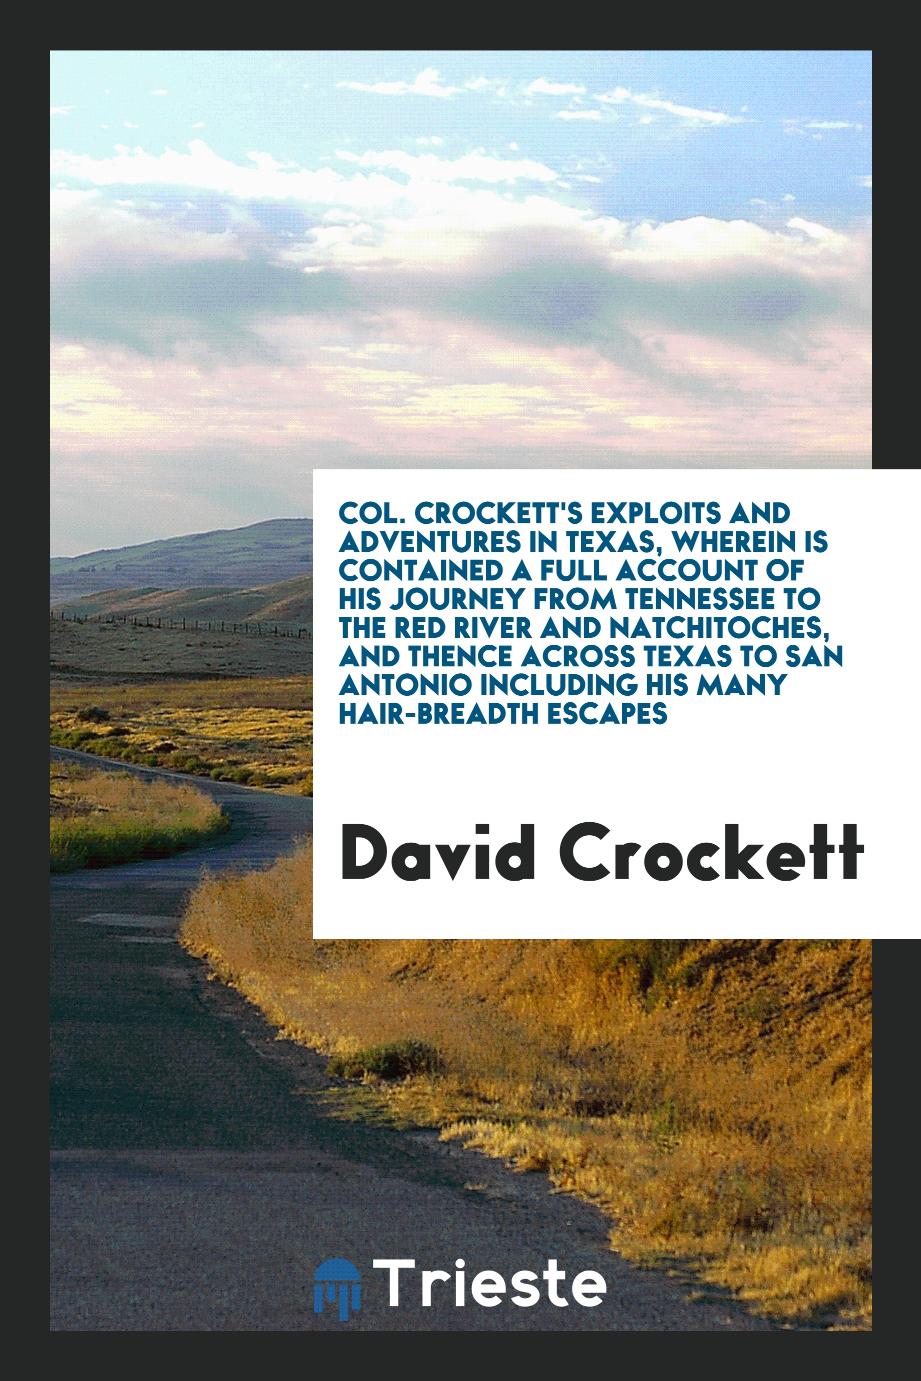 Col. Crockett's Exploits and Adventures in Texas, Wherein Is Contained a Full Account of His Journey from Tennessee to the Red River and Natchitoches, and Thence across Texas to San Antonio including His Many Hair-Breadth Escapes